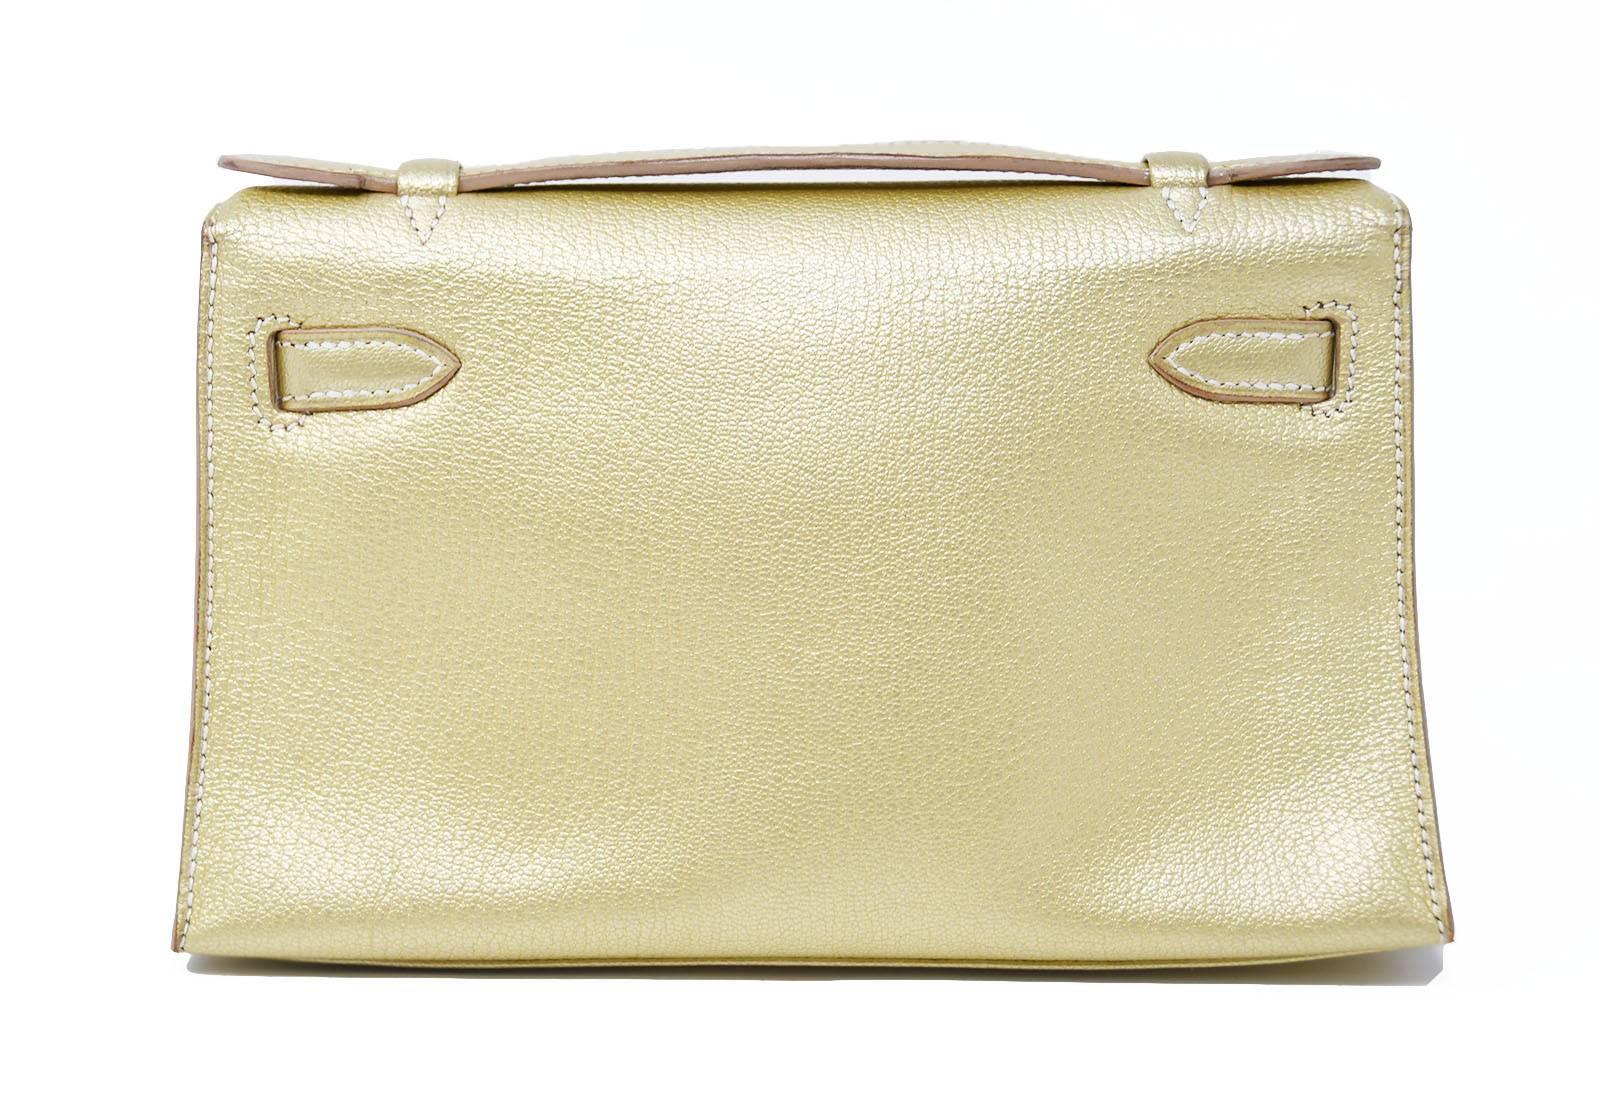 Extremely Rare and coveted Hermes Kelly Pouchette in gold leather with Palladium Hardware.  New and never been used. In pristine condition, this bag comes with box and dustcover.  